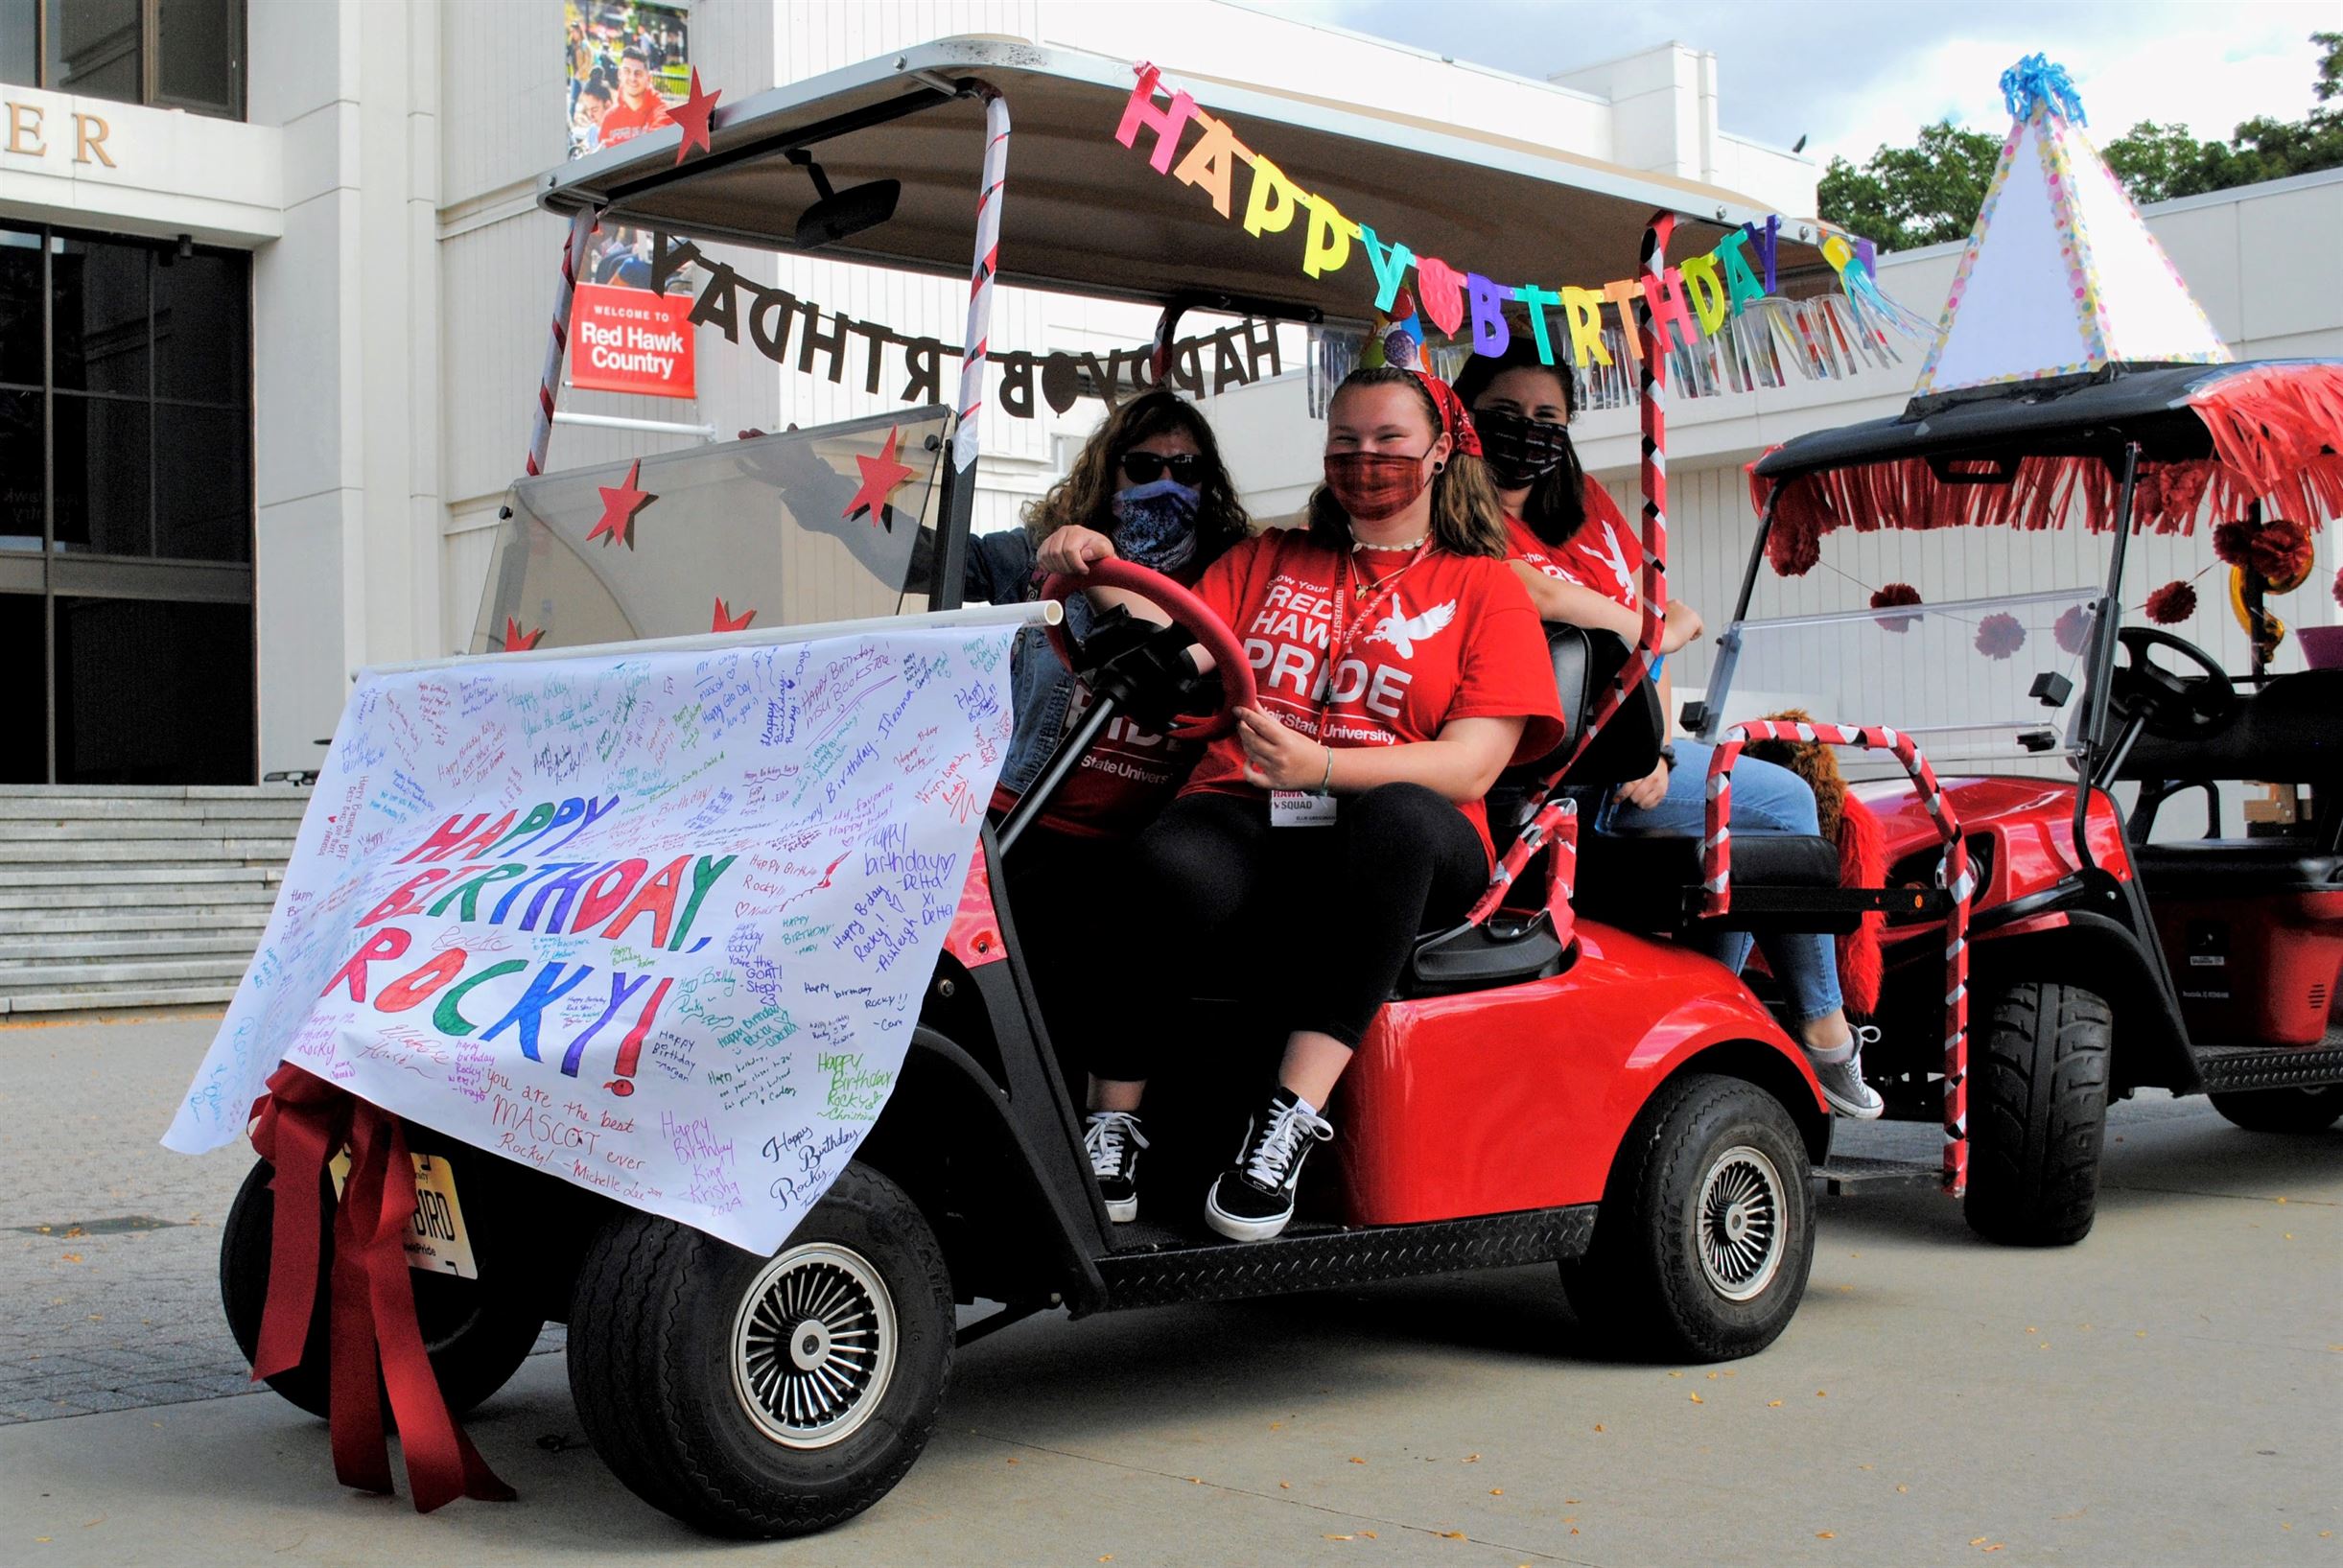 Team Rocky's senior psychology major Grace Ehrline, freshman Ellie Gressman and junior political science/German language major Sammi Gerbrick get ready to roll out for Rocky's birthday parade. Michael Giannotti | The Montclarion